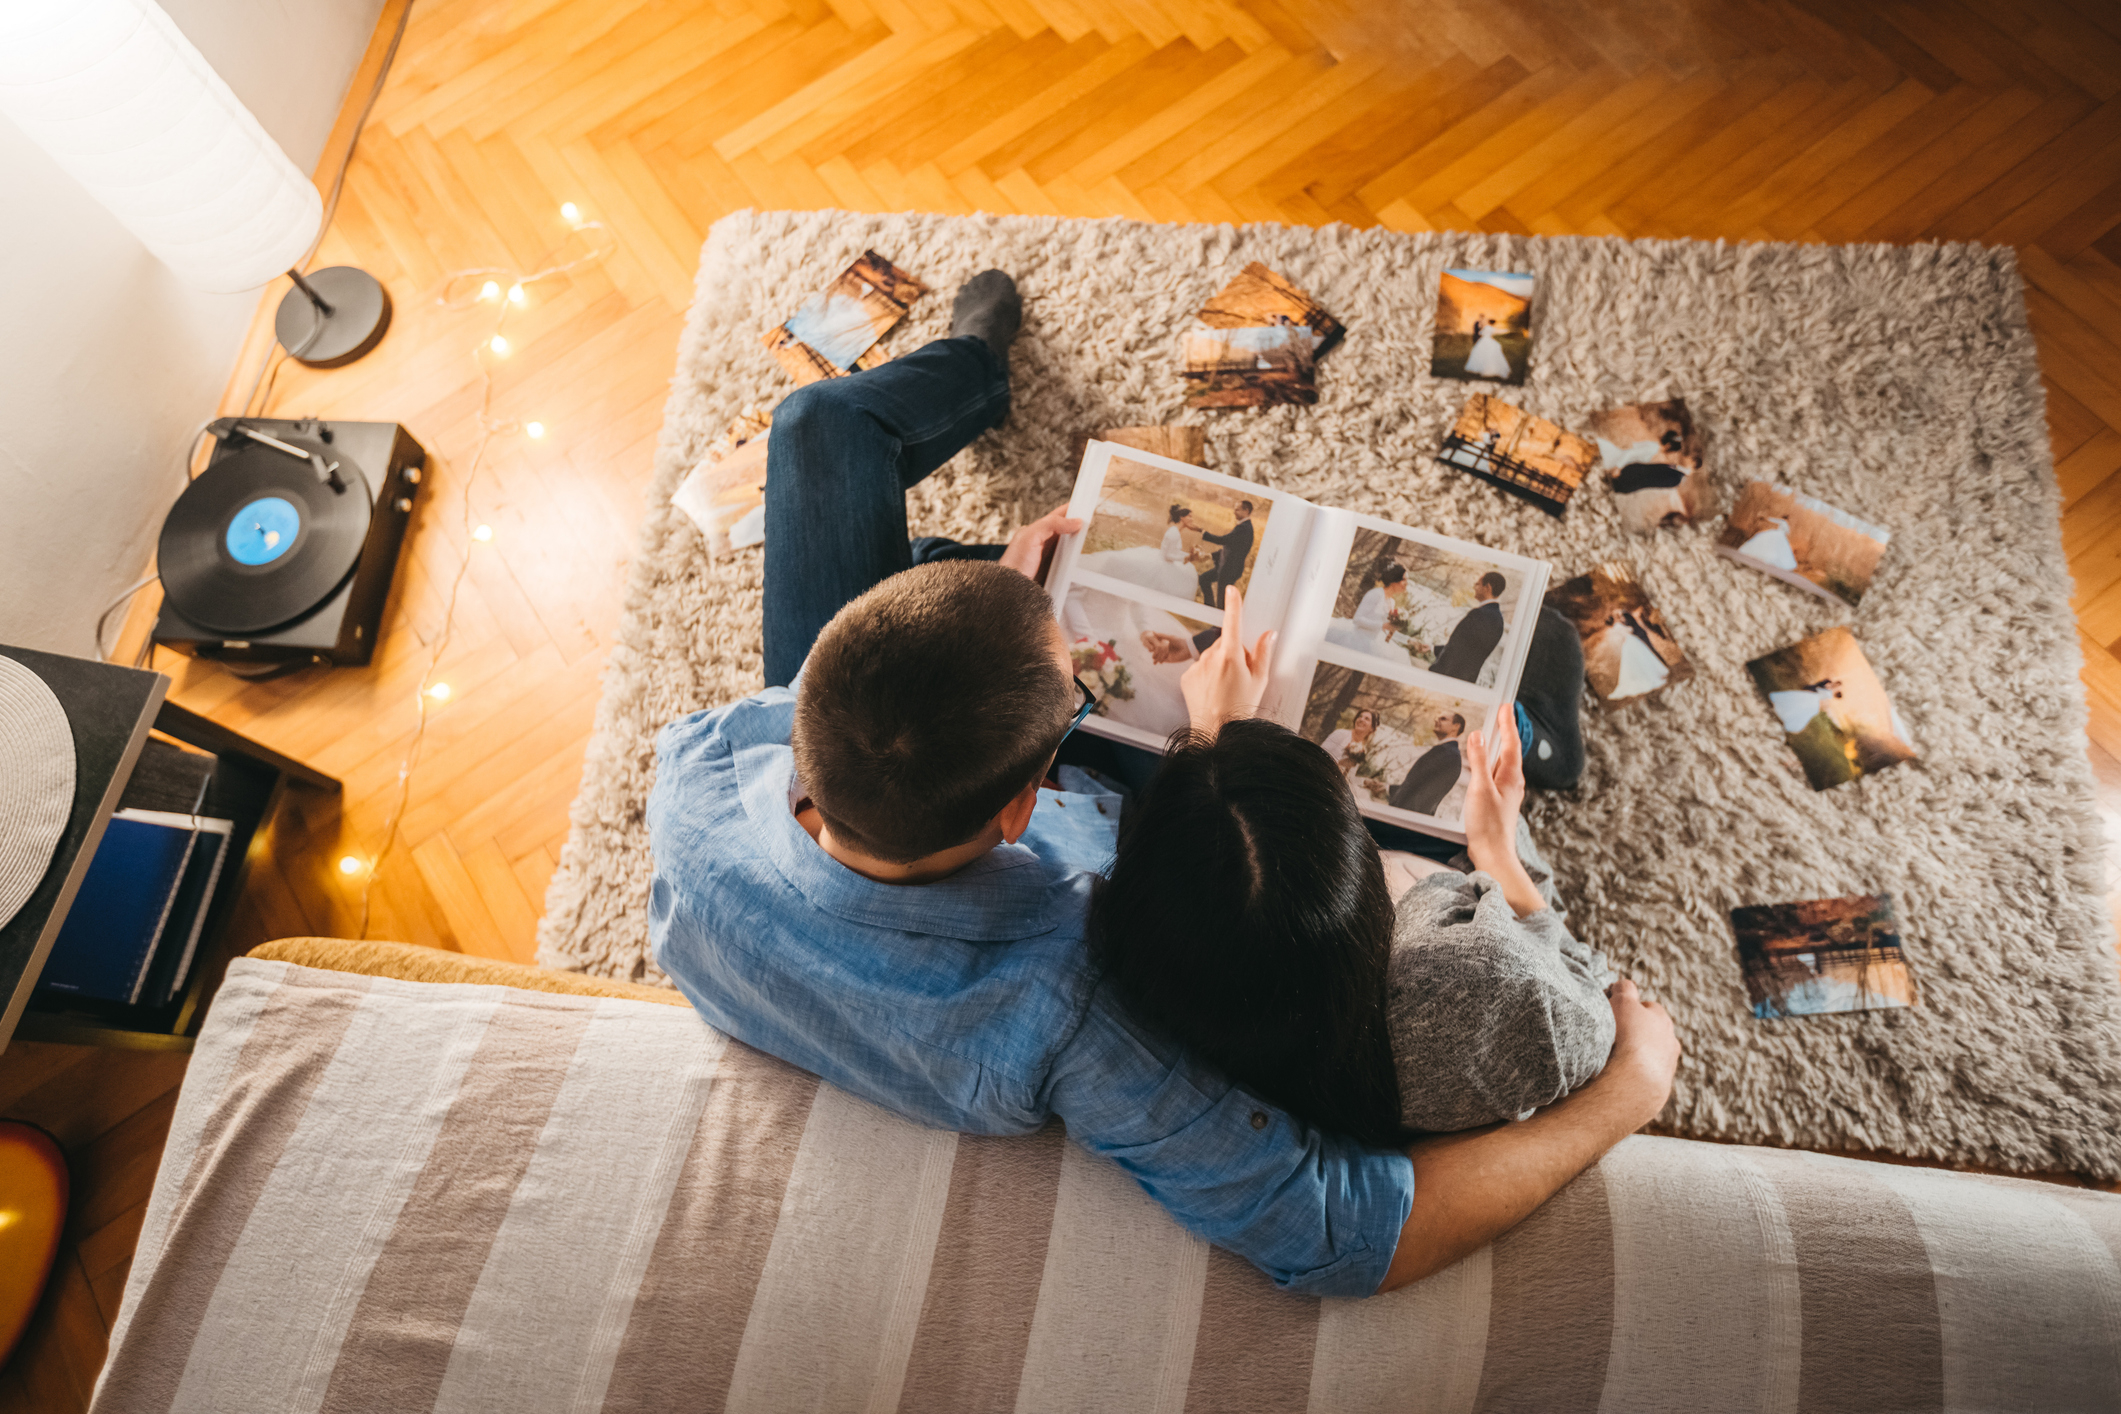 A couple is sitting on a couch, looking at a photo album together. There are several photos spread around them on the carpet, suggesting shared memories